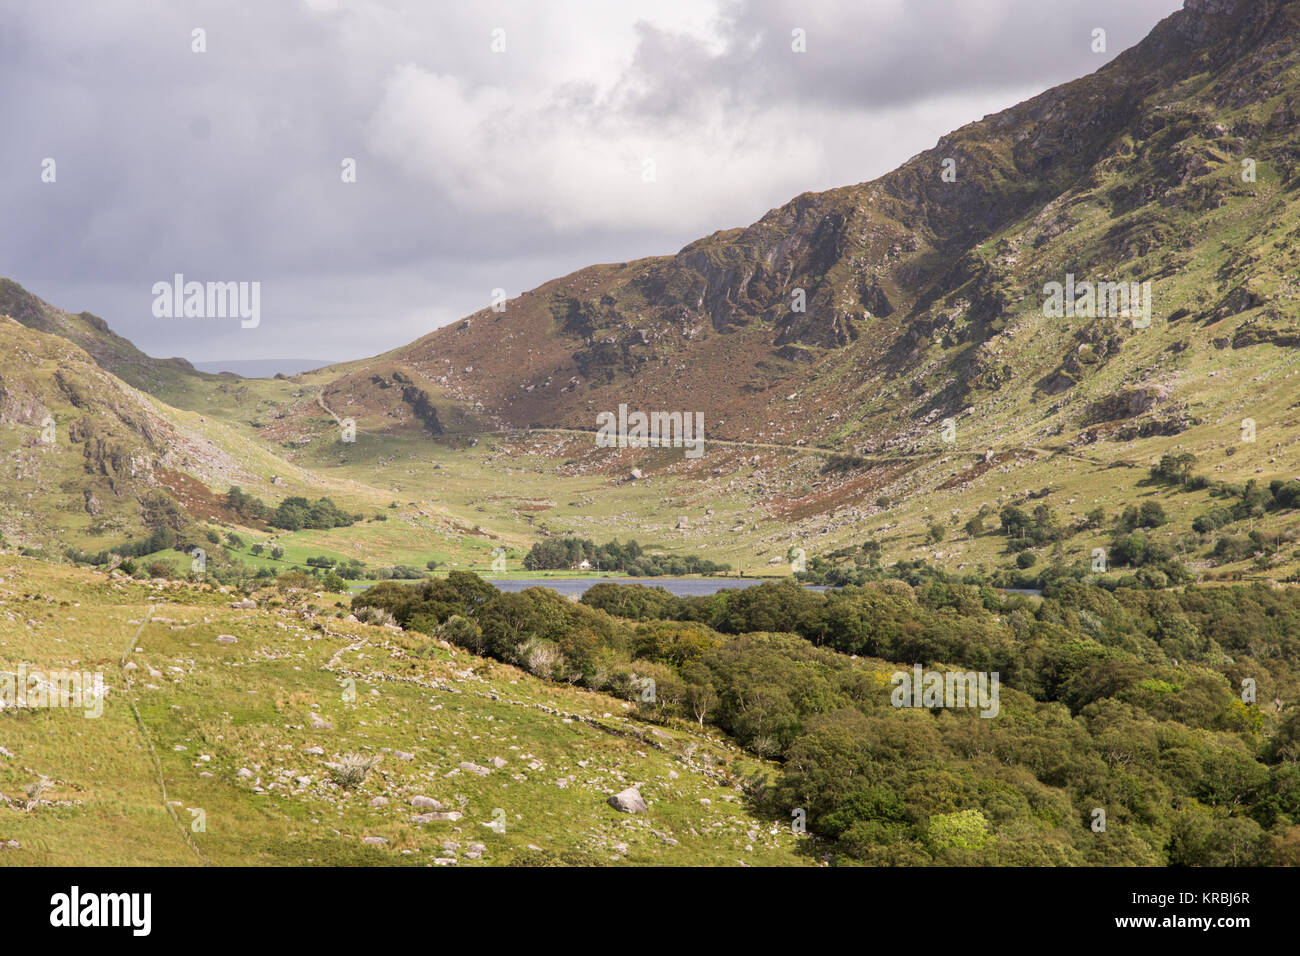 The lake of Lough Brin nestled in a valley under Knocklomena mountain in the Dunkerron Mountains of Ireland's County Kerry. Stock Photo